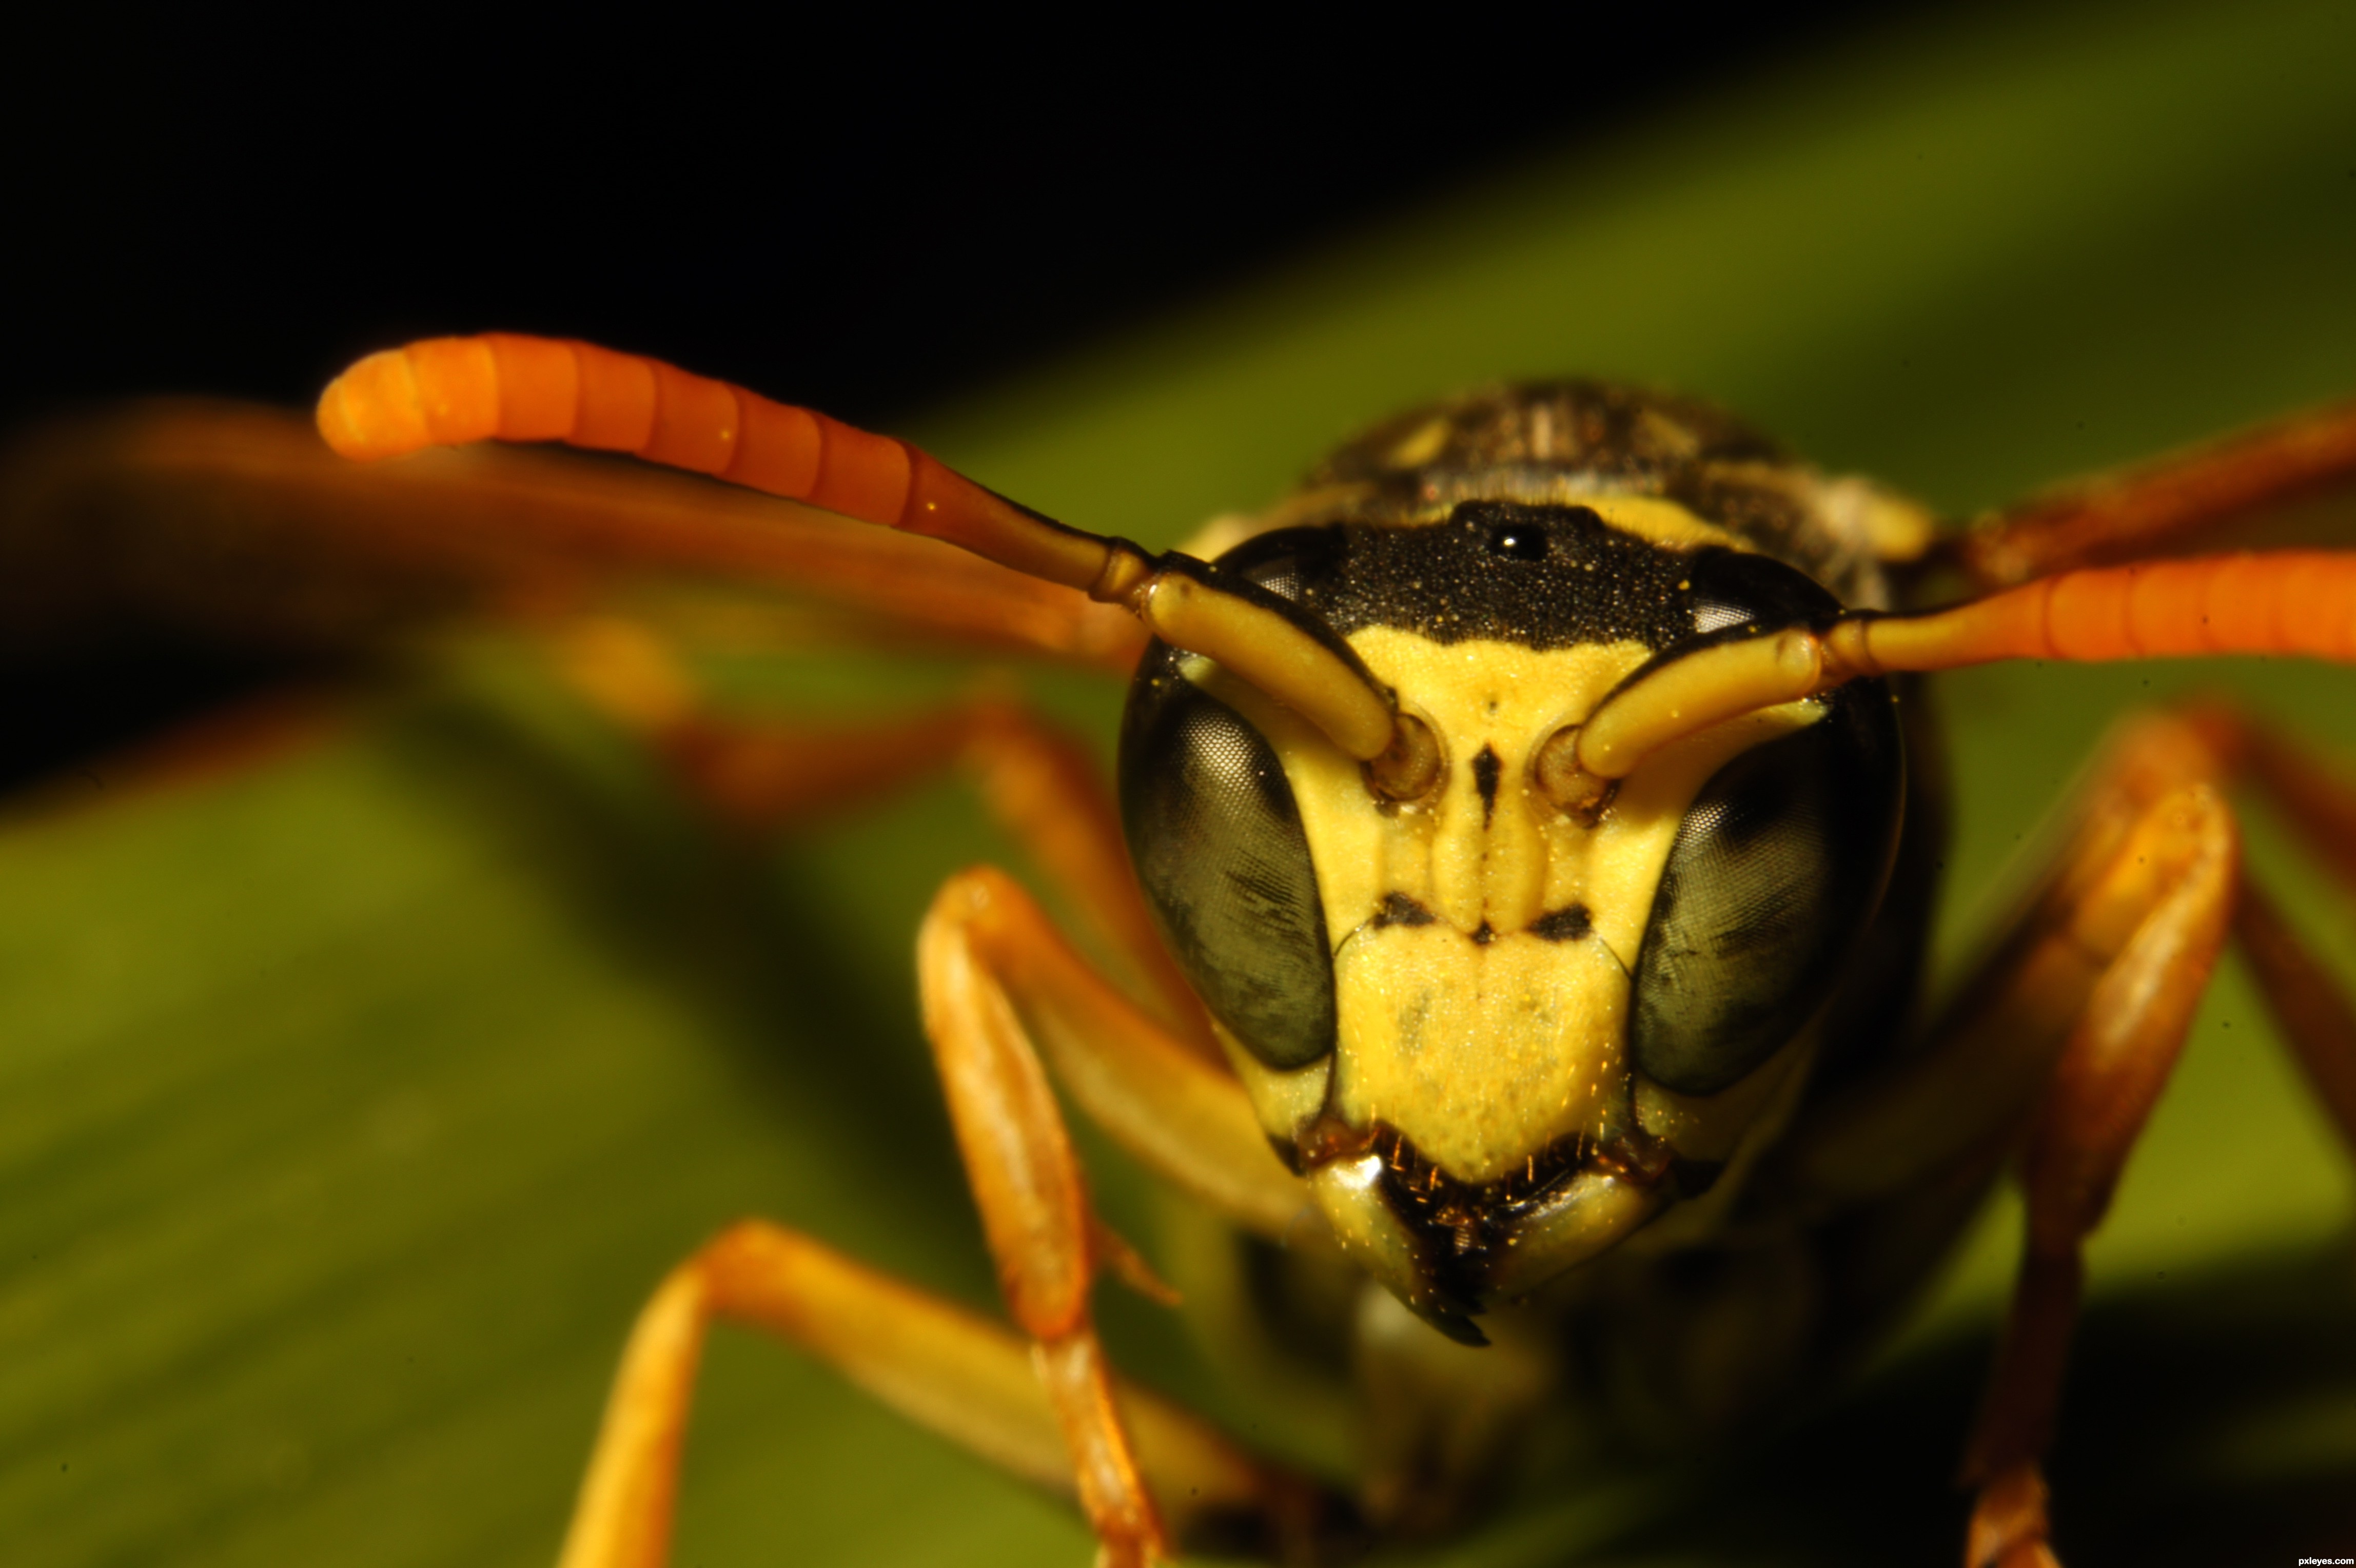 Yikes a Wasp! picture, by TankRed for: macro bugs 3 photography ...